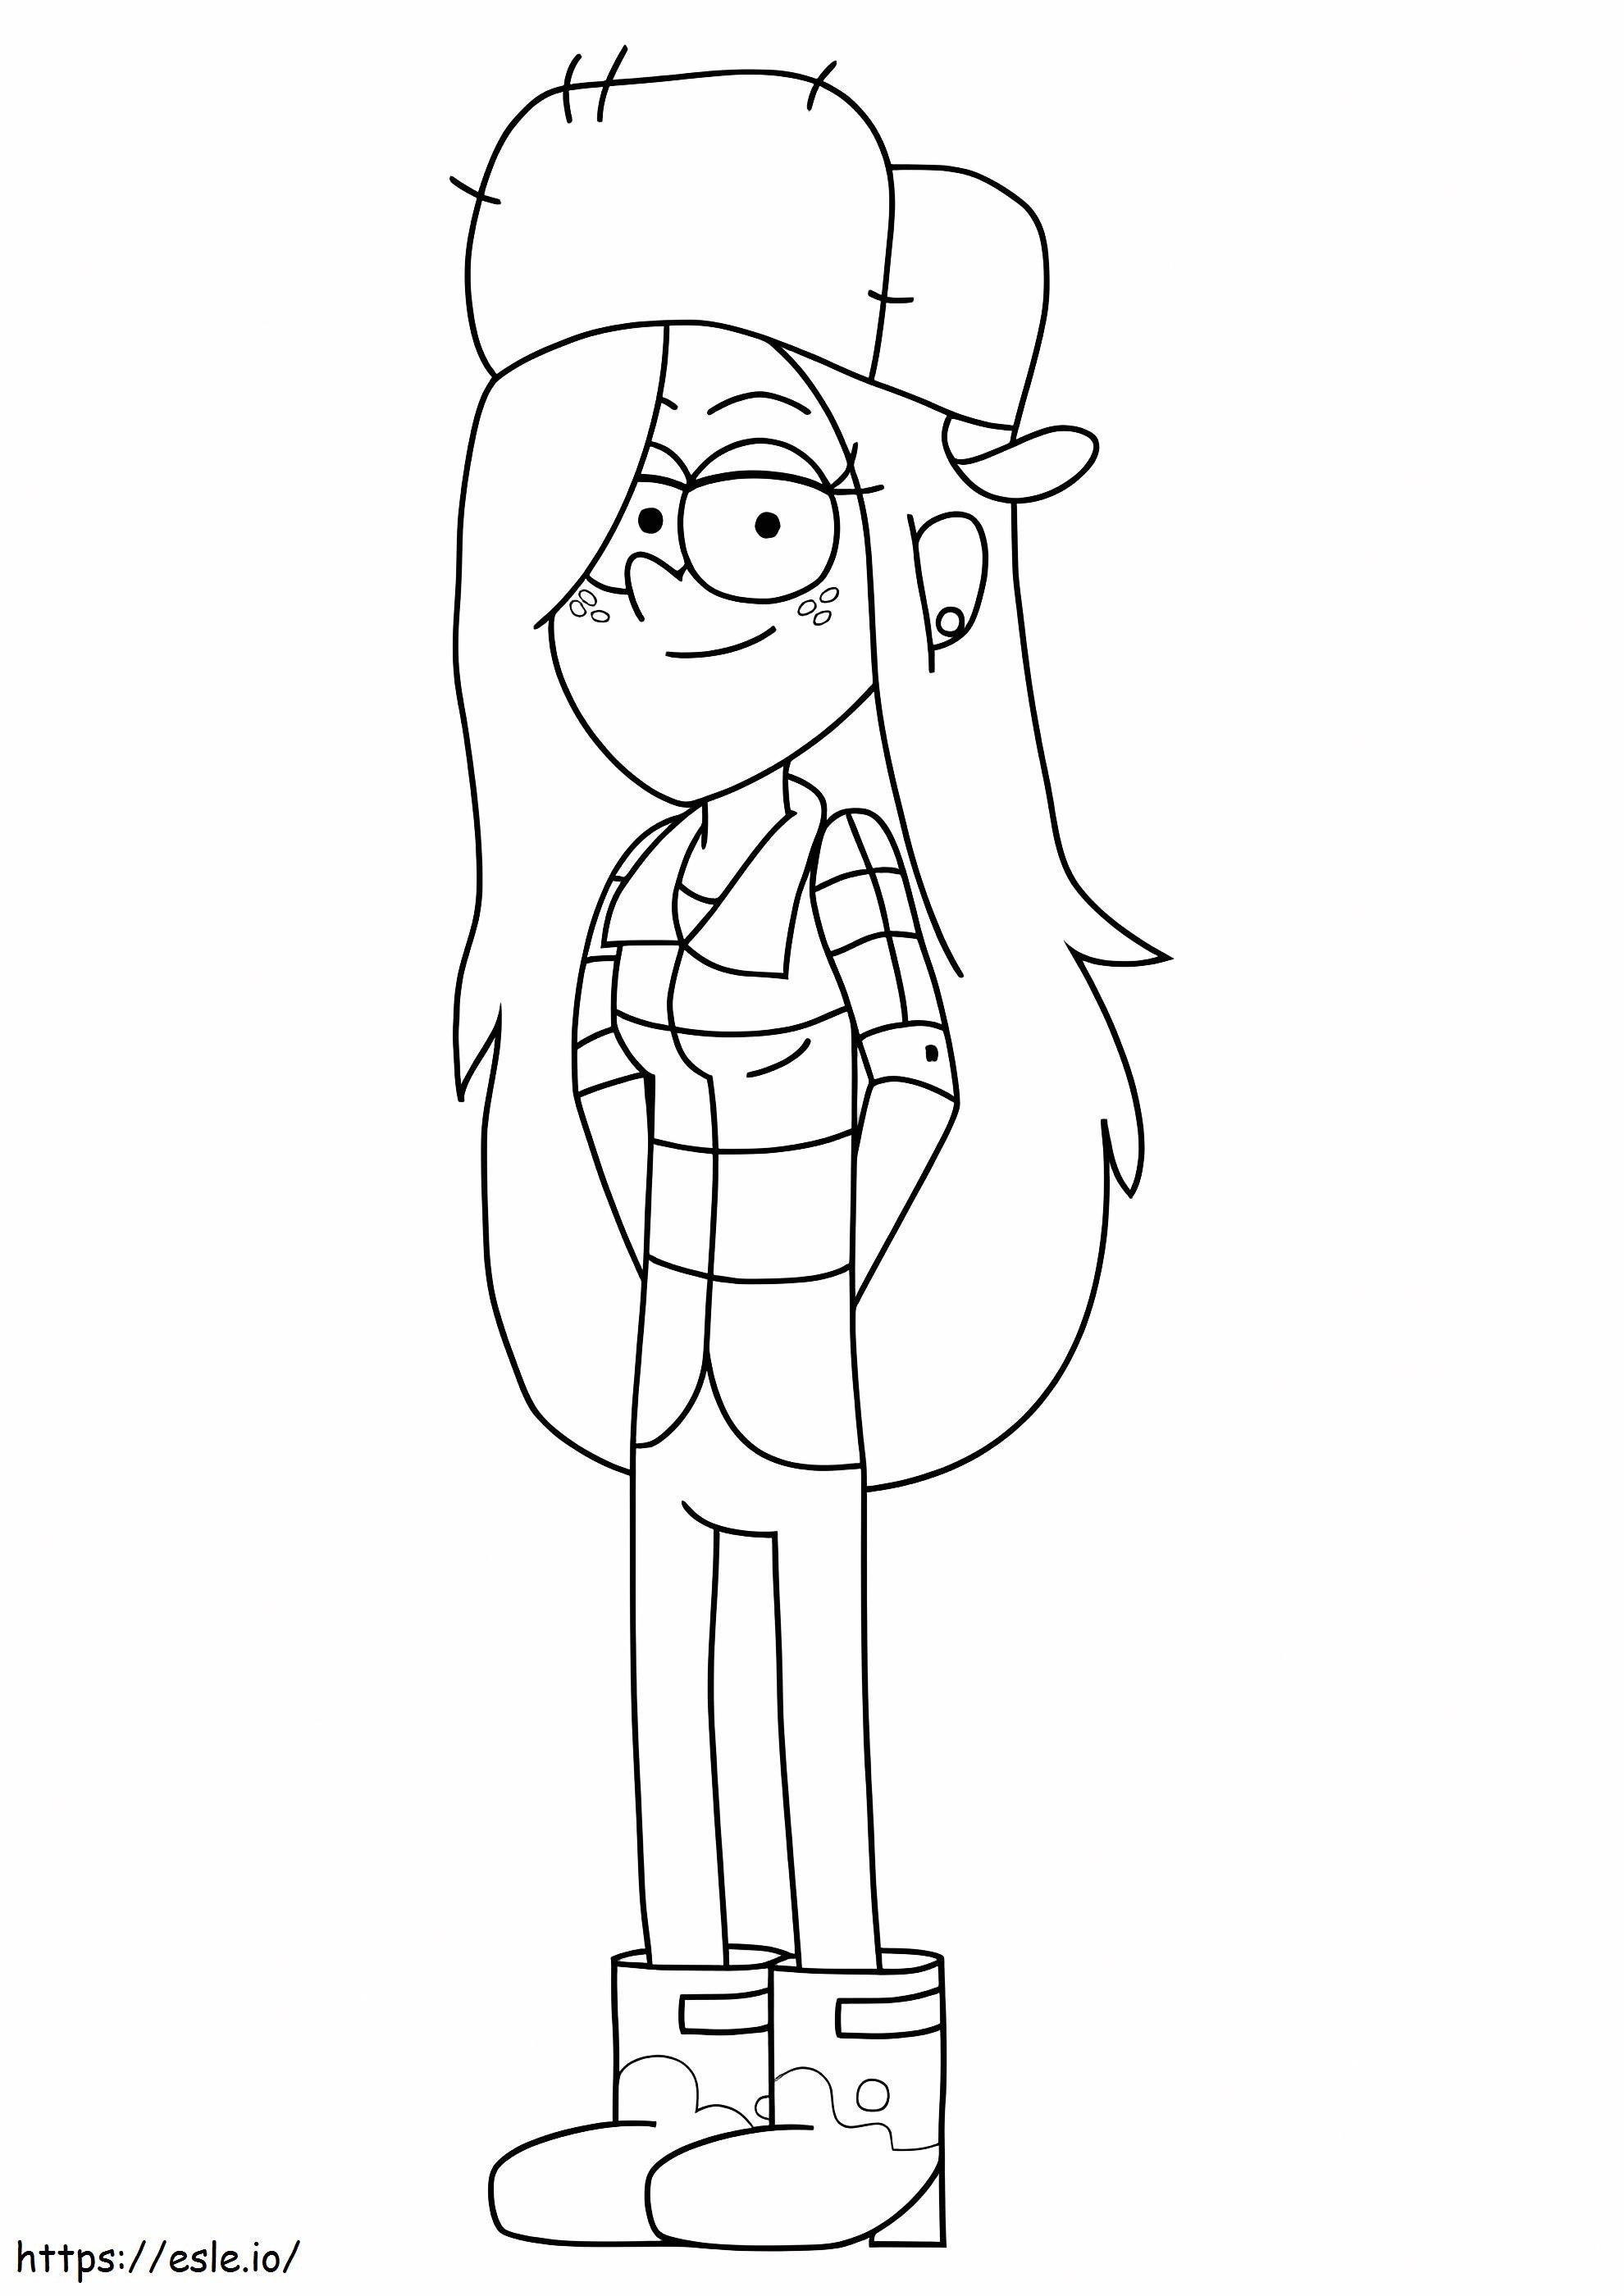 Wendy Smiling coloring page